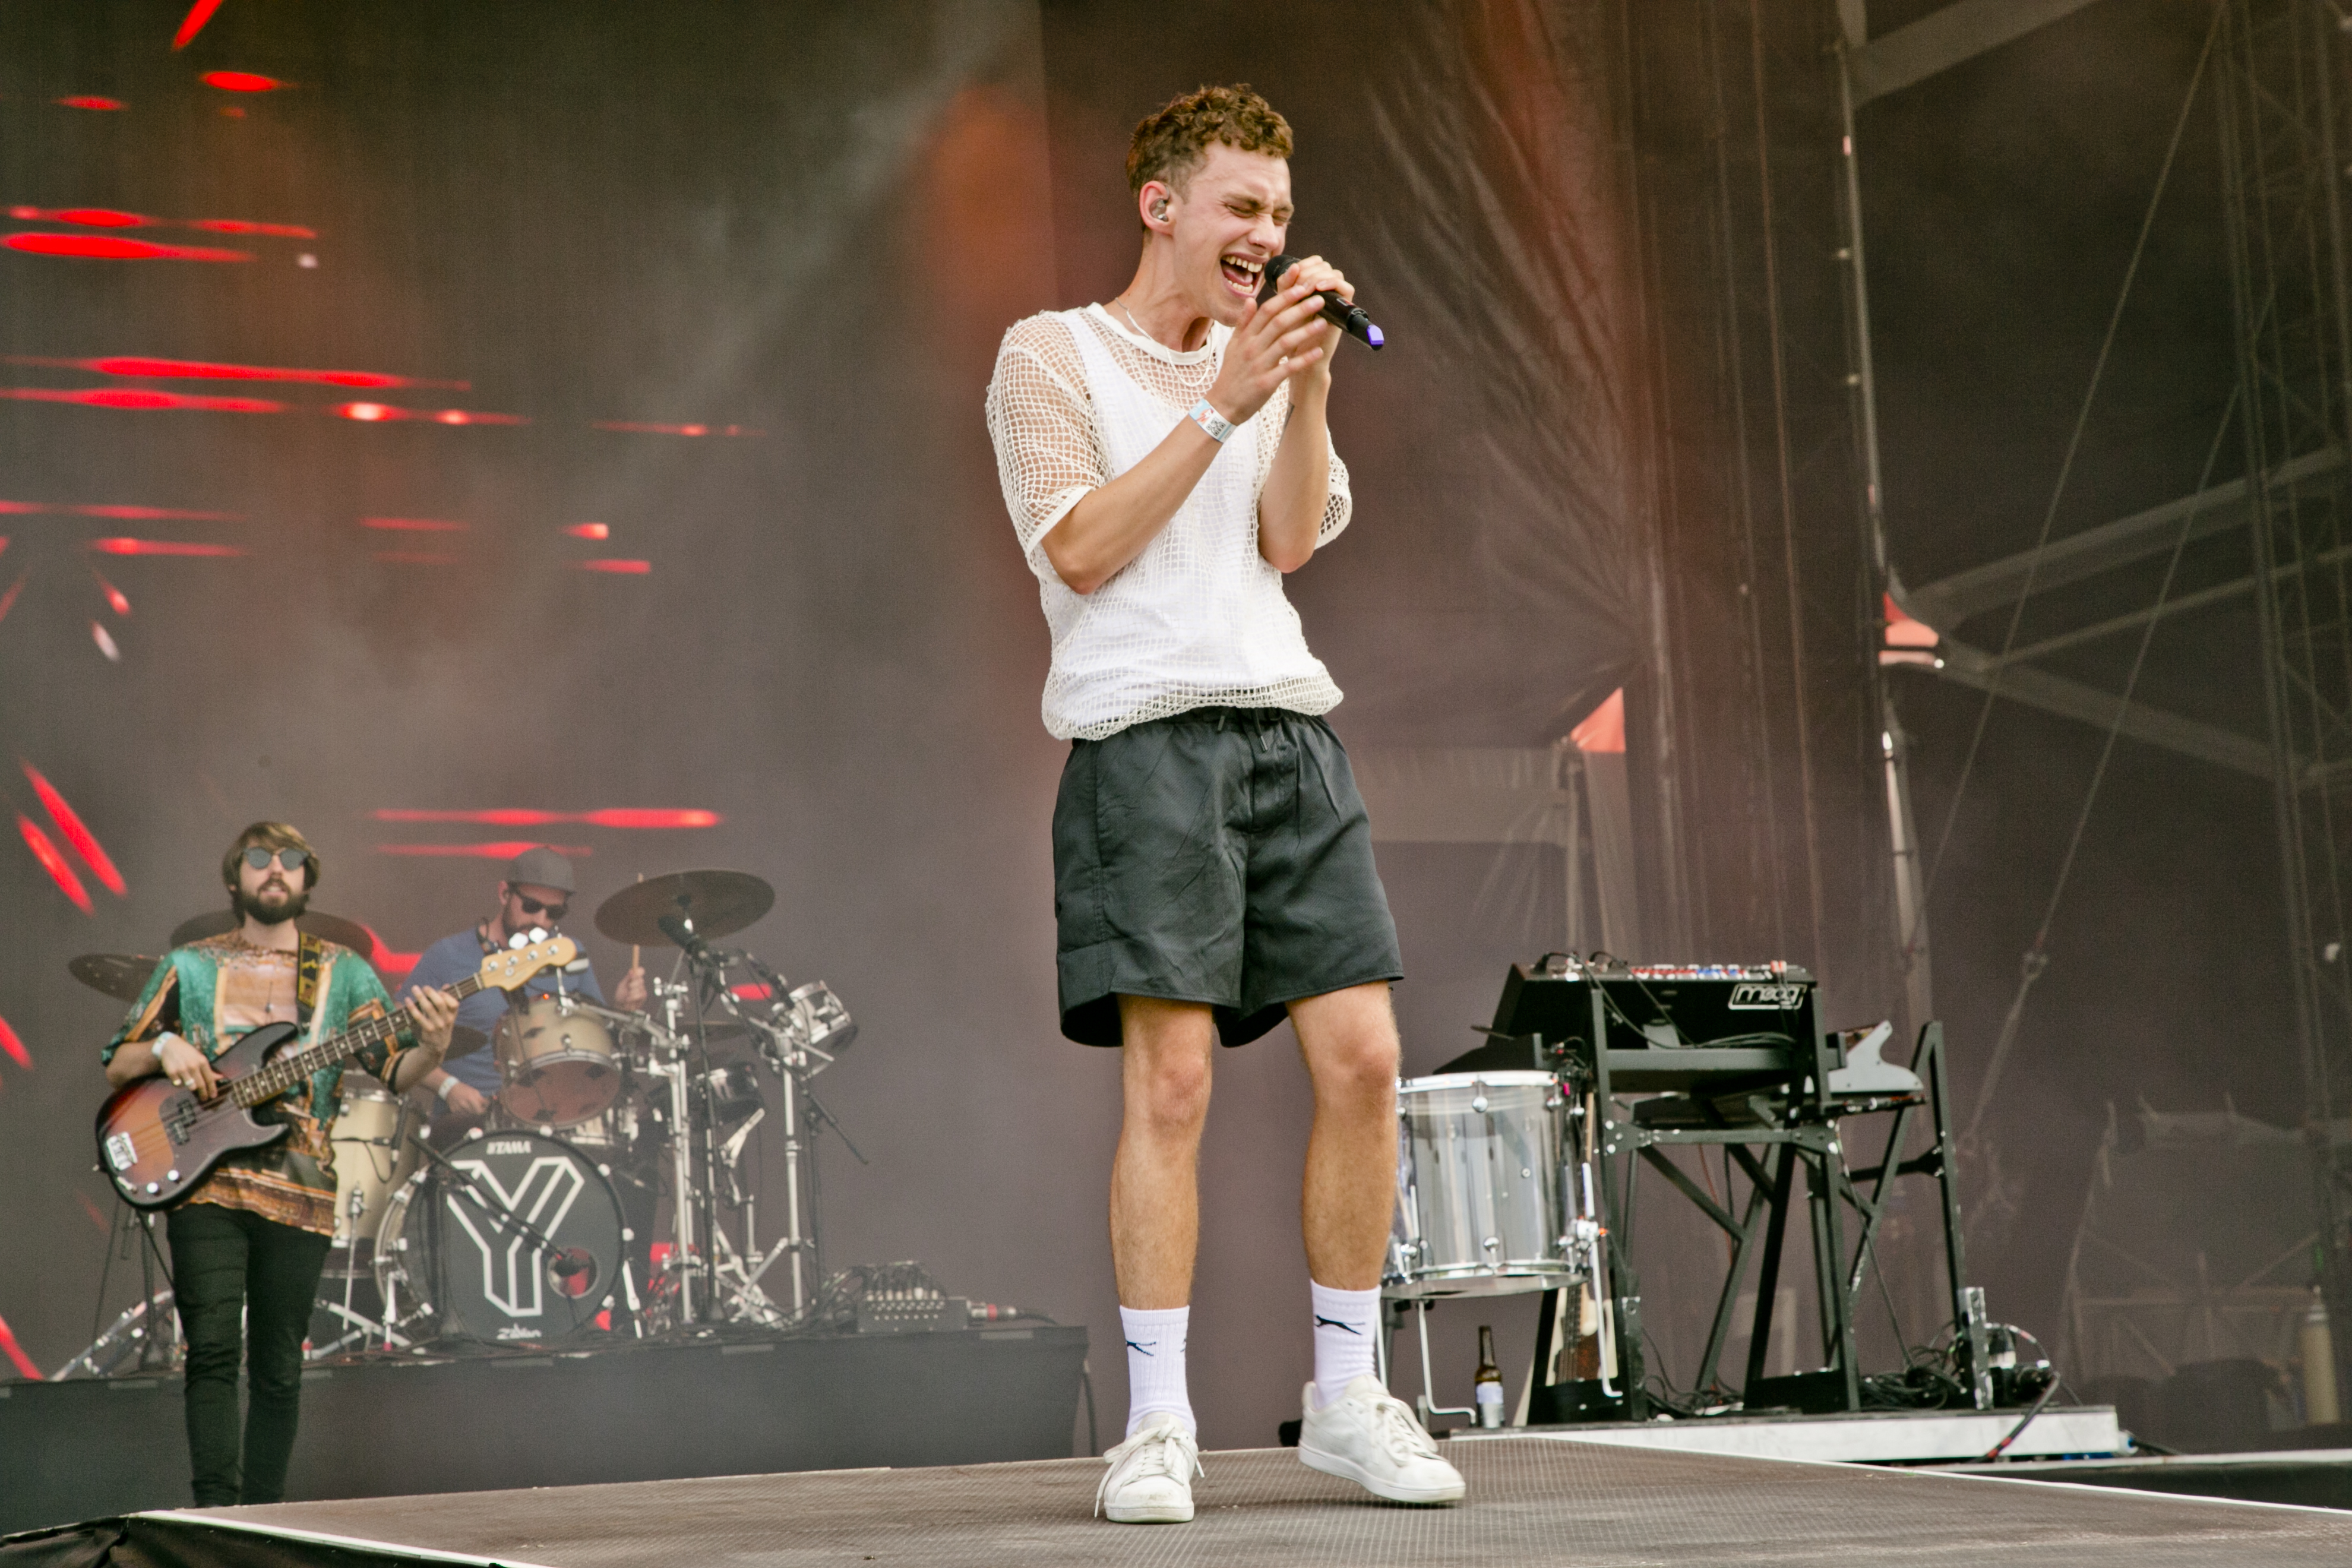 Years & Years at Sziget Festival, Budapest, Hungary - 15 August 2016